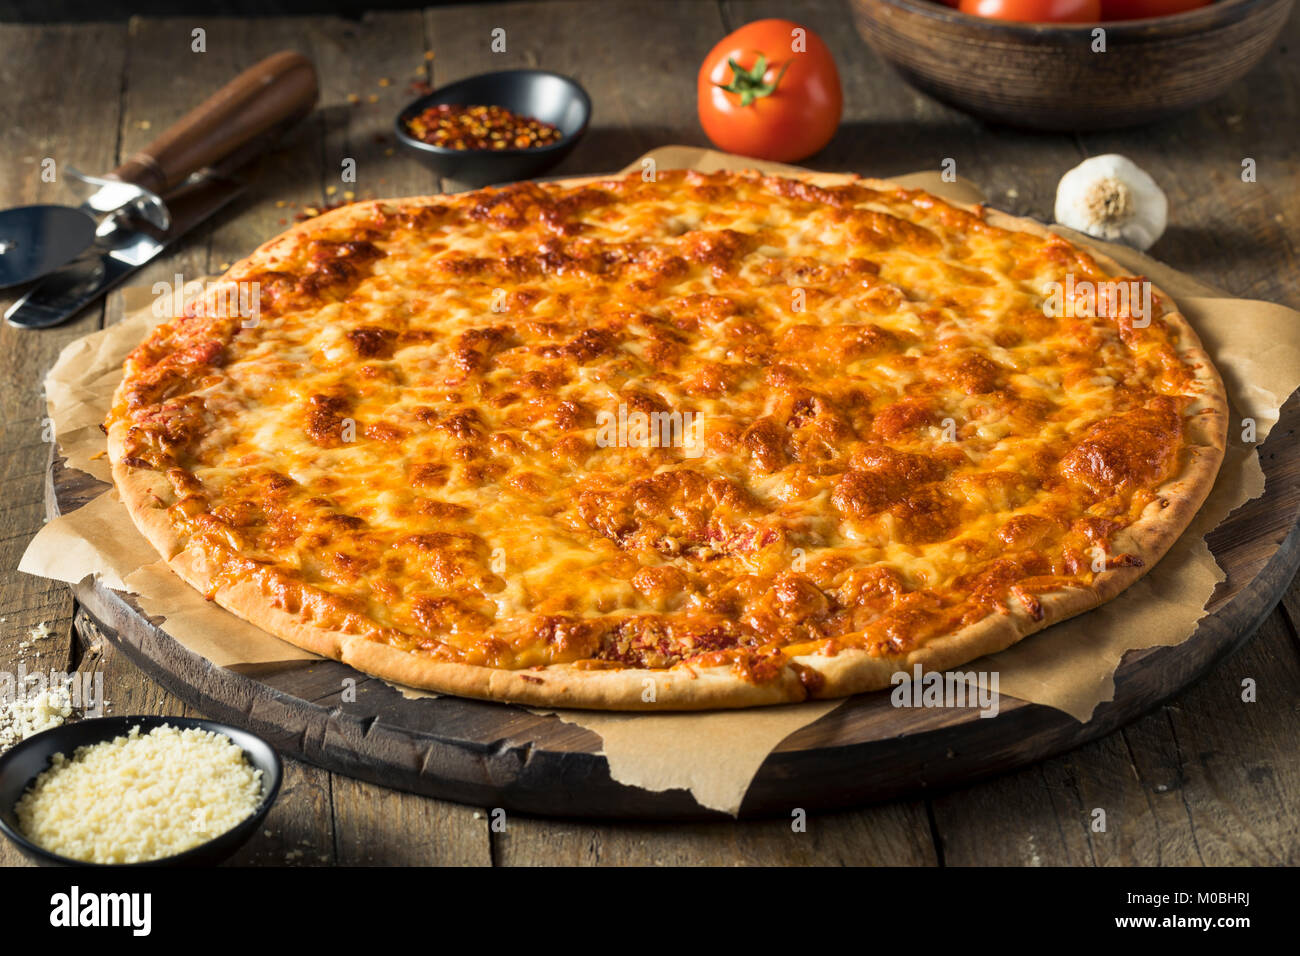 Delicious Homemade Cheese PIzza Cut into Square Slices Stock Photo